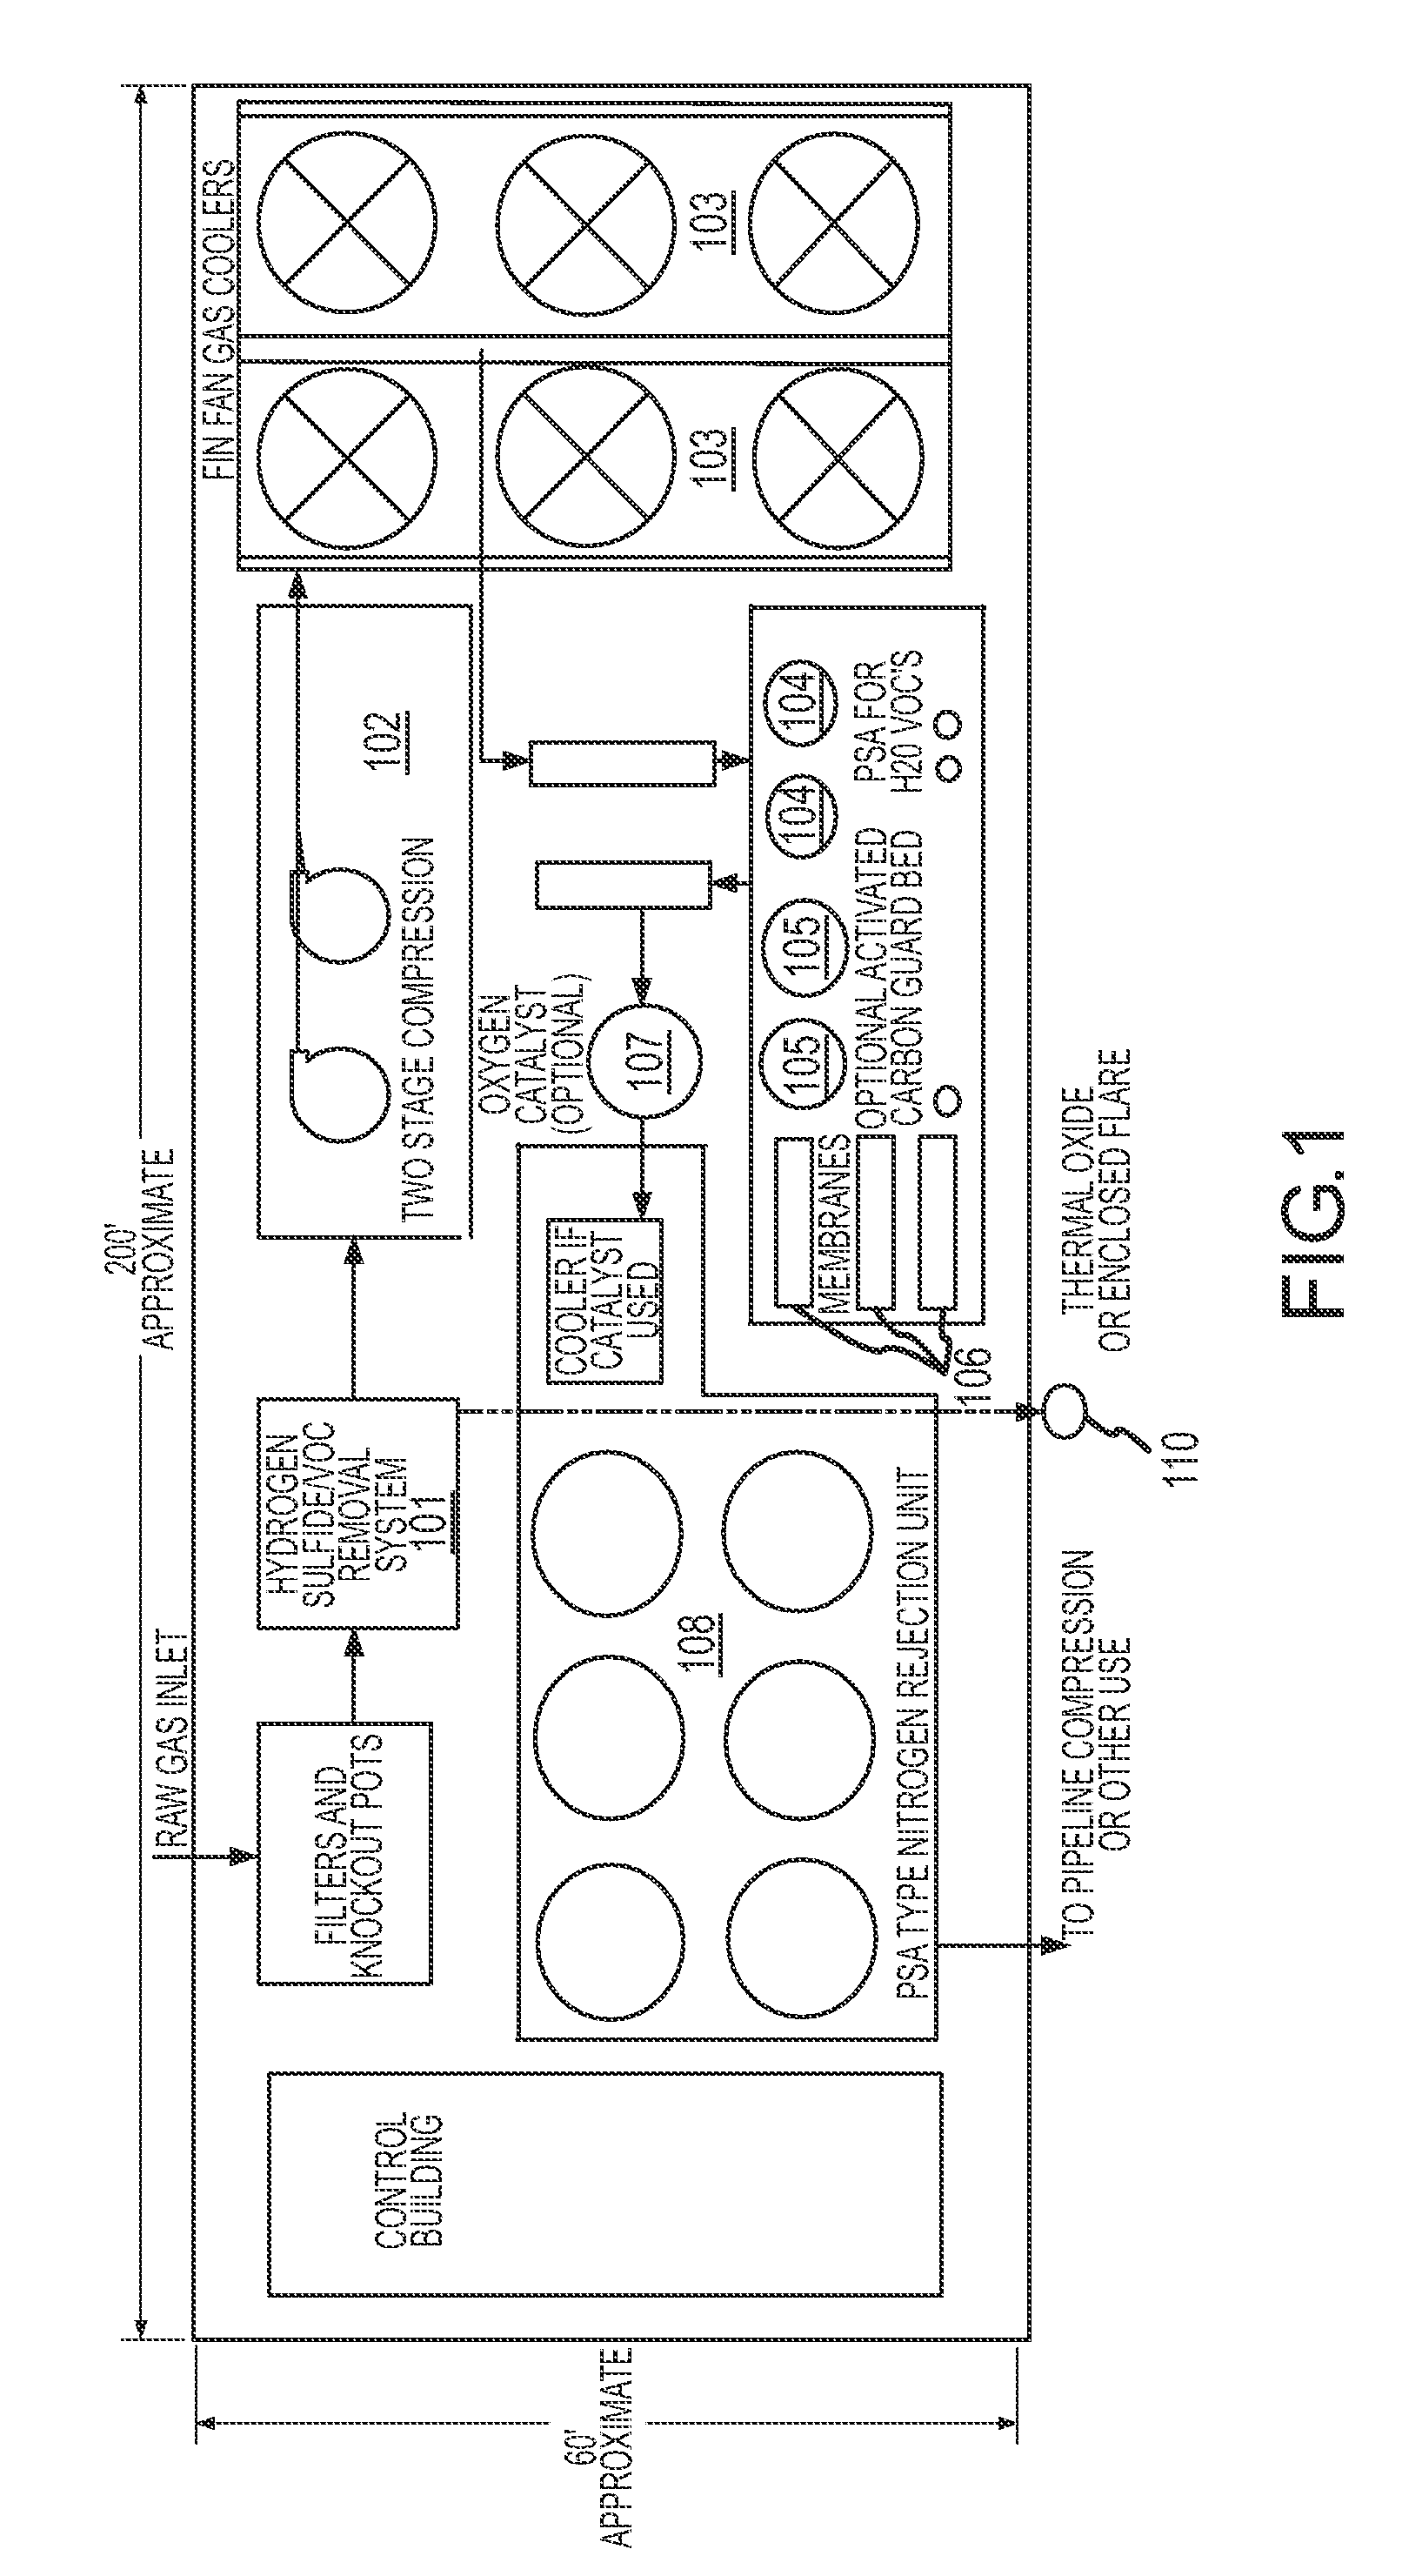 Method for processing landfill and other stranded gas containing commercial quantities of methane and contaminated by carbon dioxide, nitrogen and oxygen into a pipeline or vehicle quality natural gas product